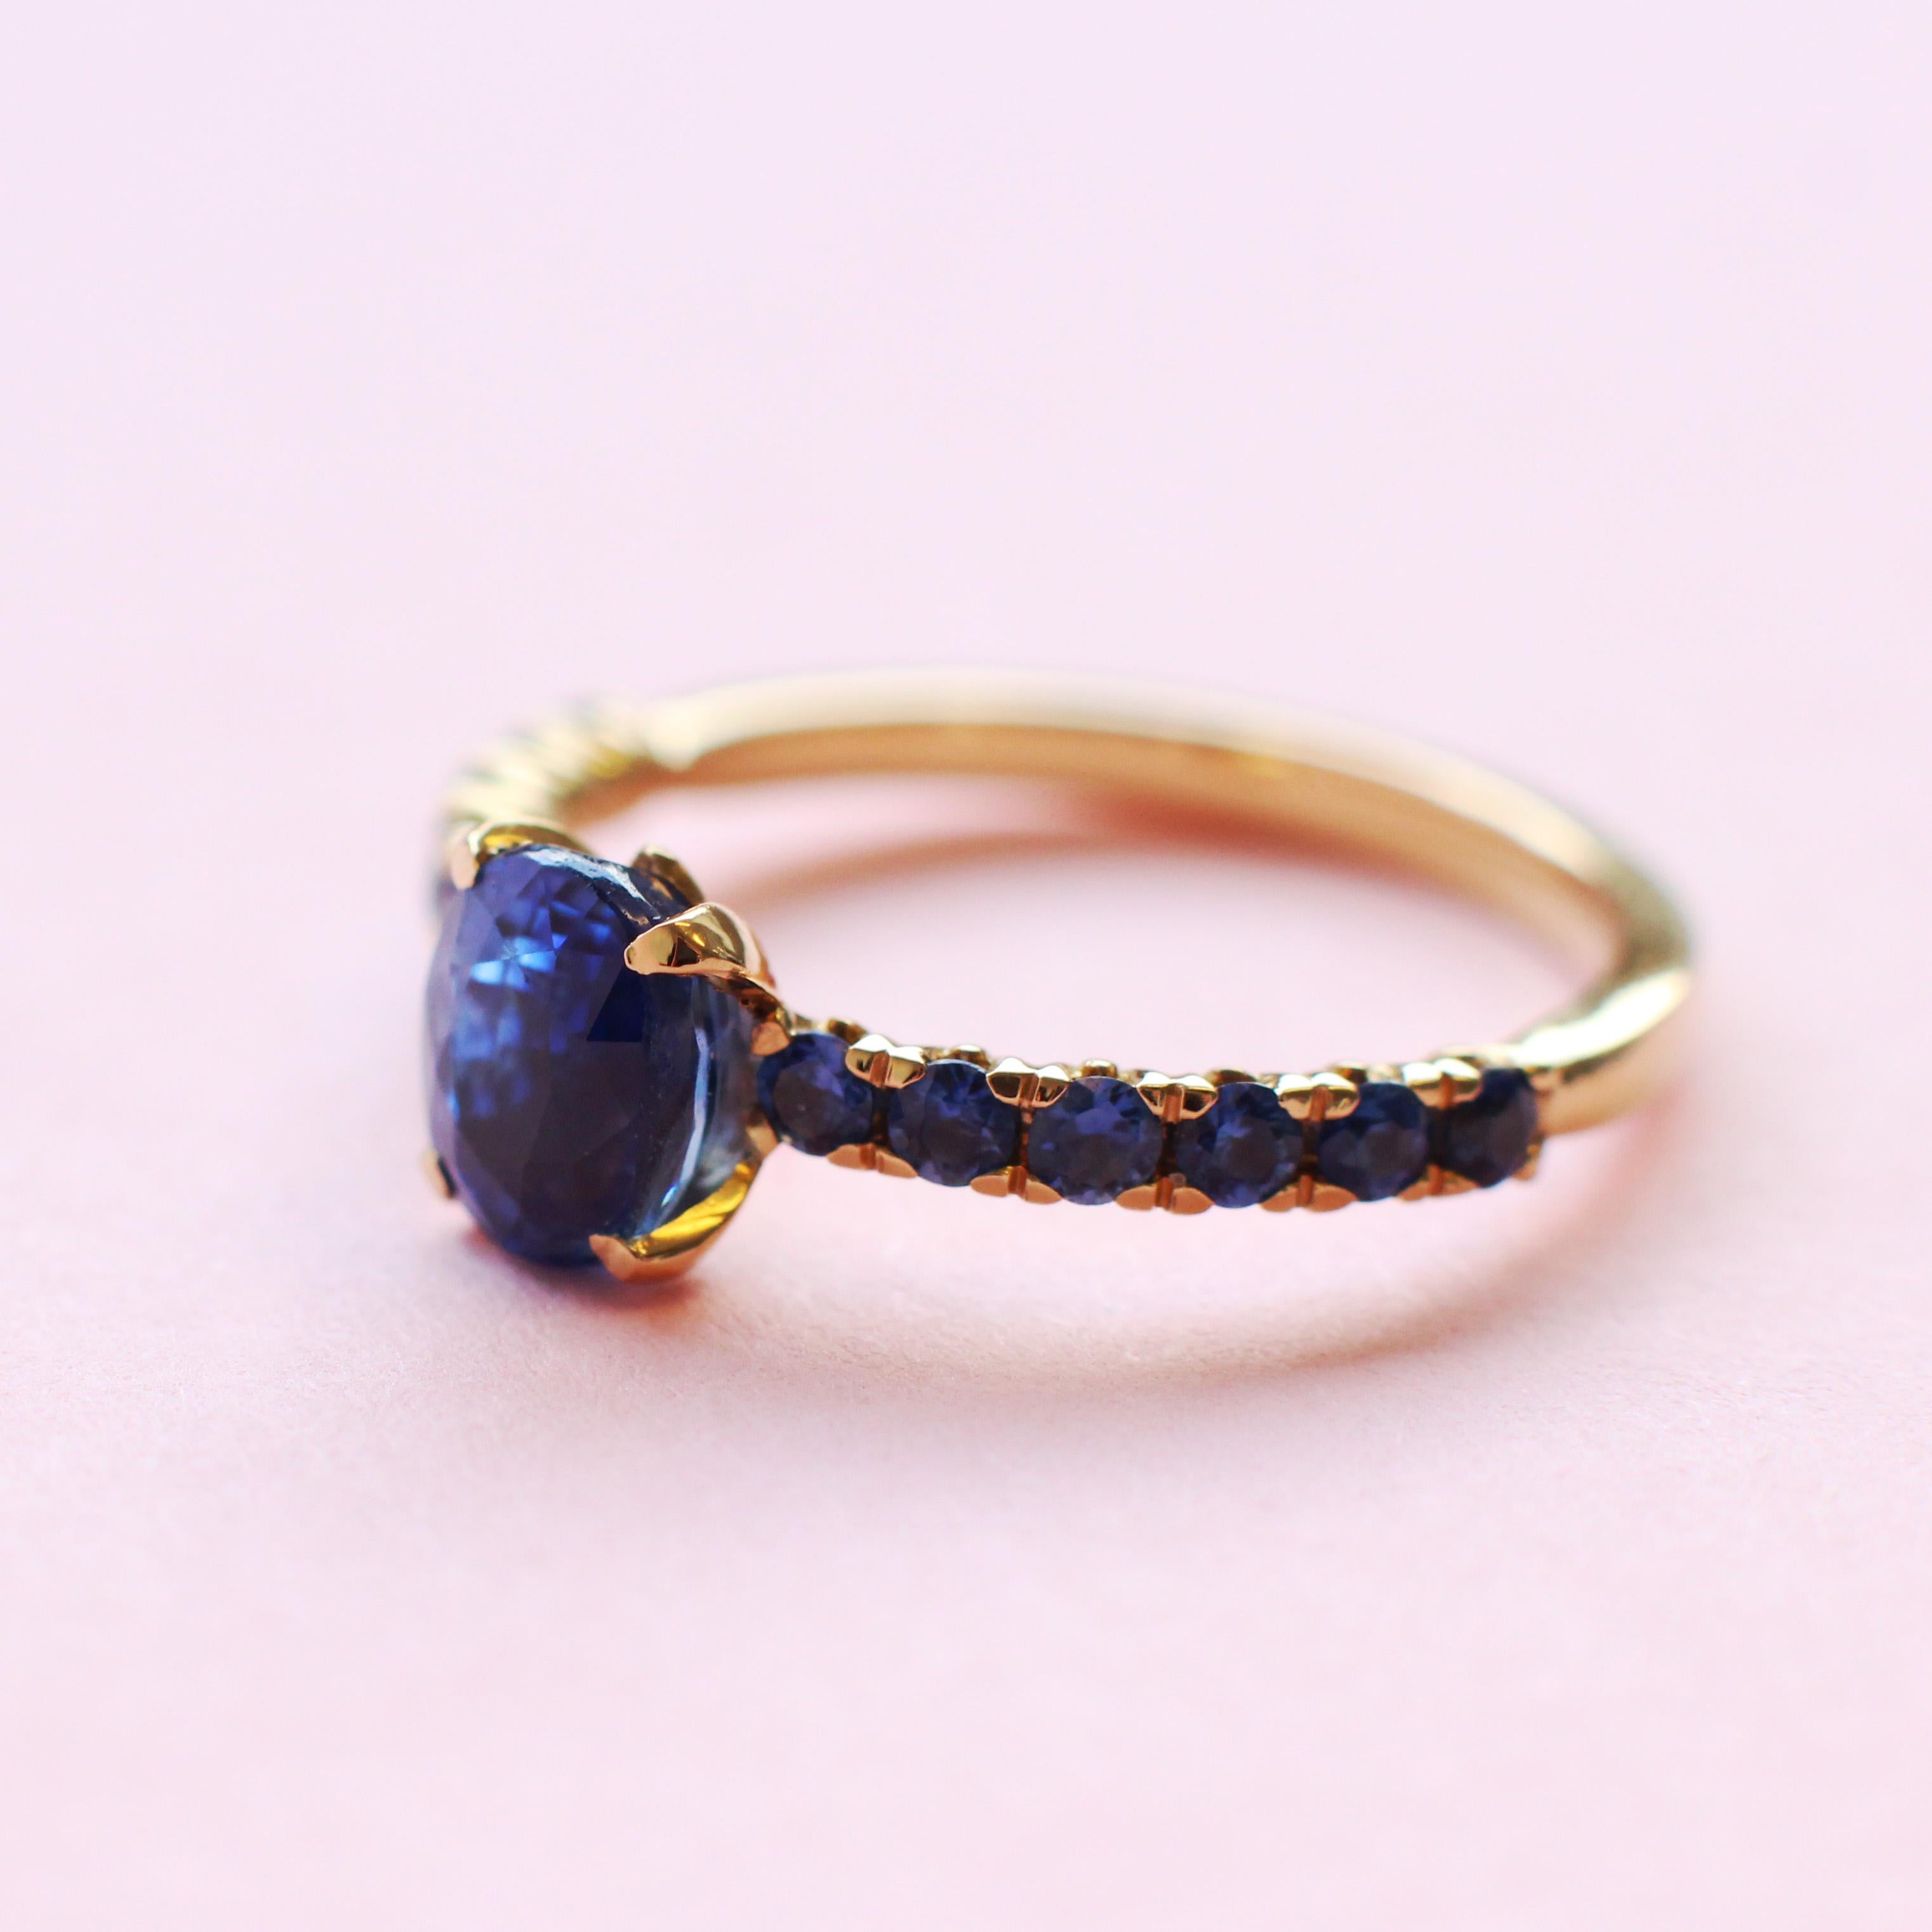 Blue on Blue Sapphire Solitaire Ring Set in 18 Karat Yellow Gold In New Condition For Sale In London, GB